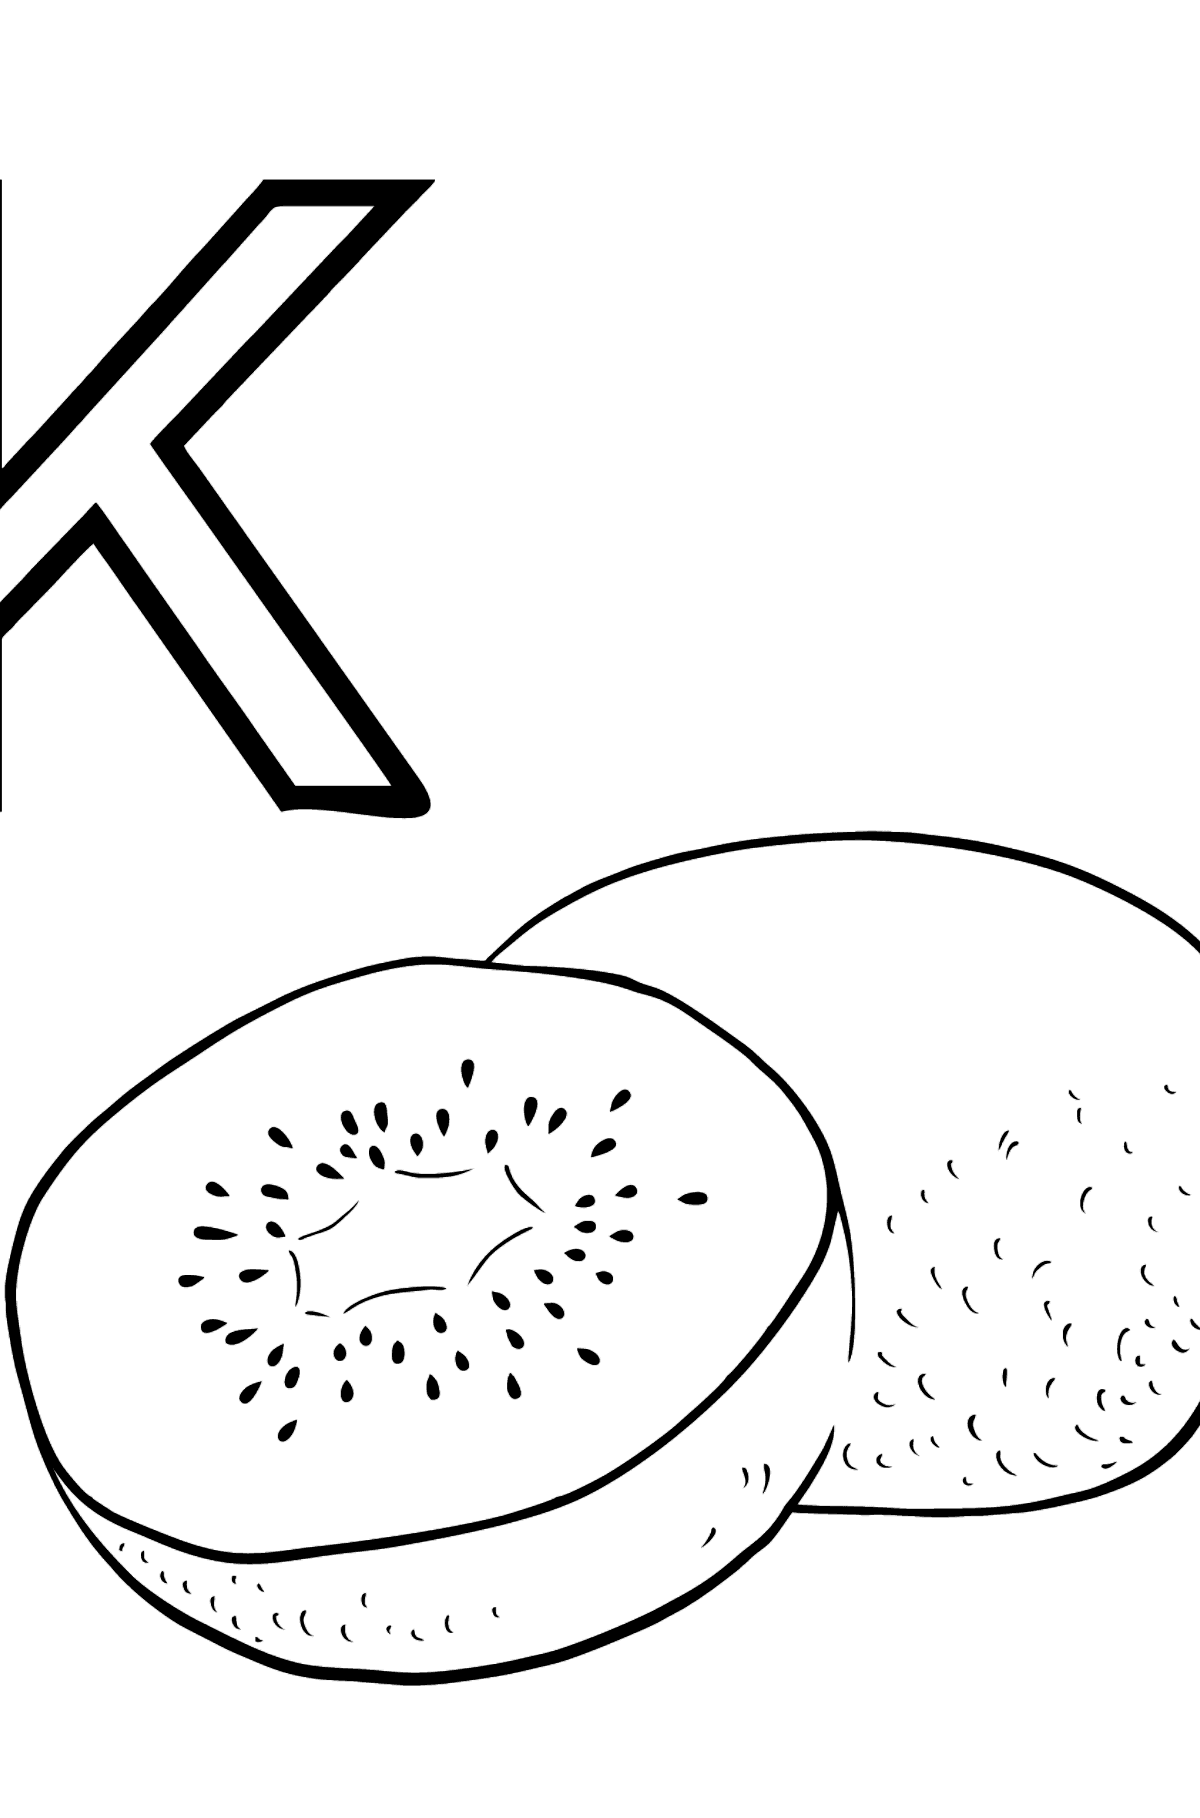 Portuguese Letter K coloring pages - KIWI - Coloring Pages for Kids